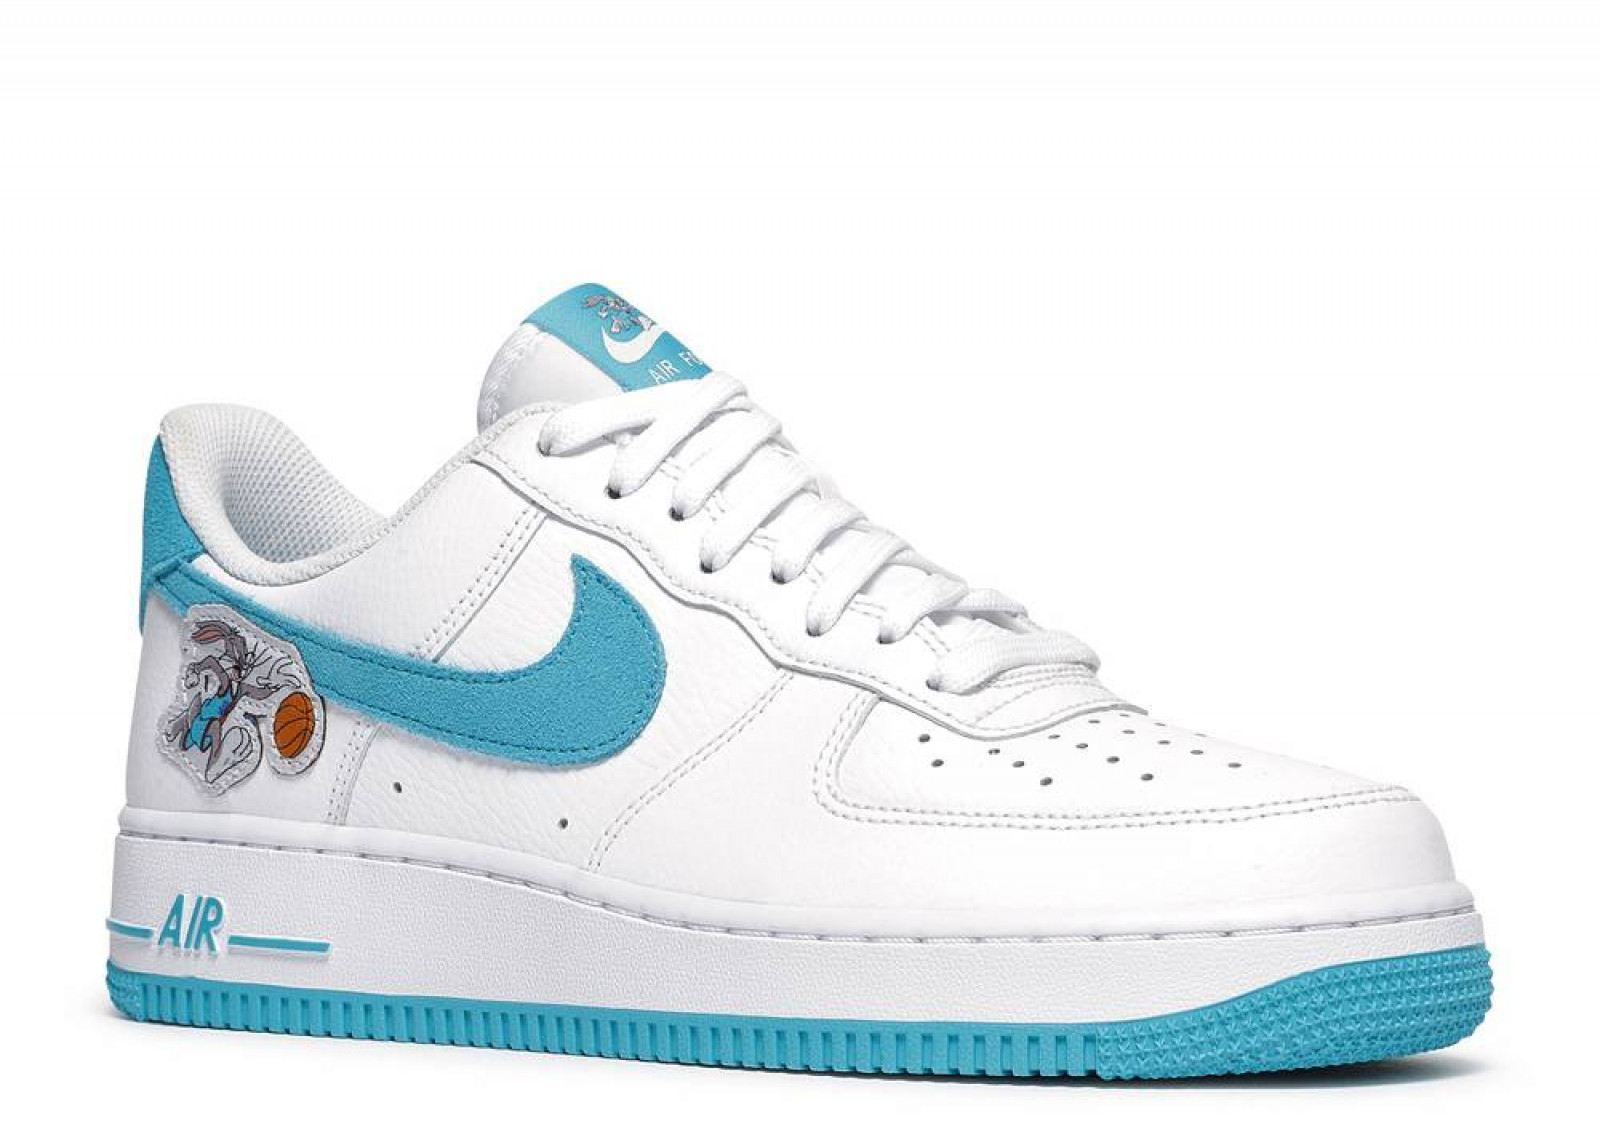 SPACE JAM X AIR FORCE 1 07 LOW HARE image 2